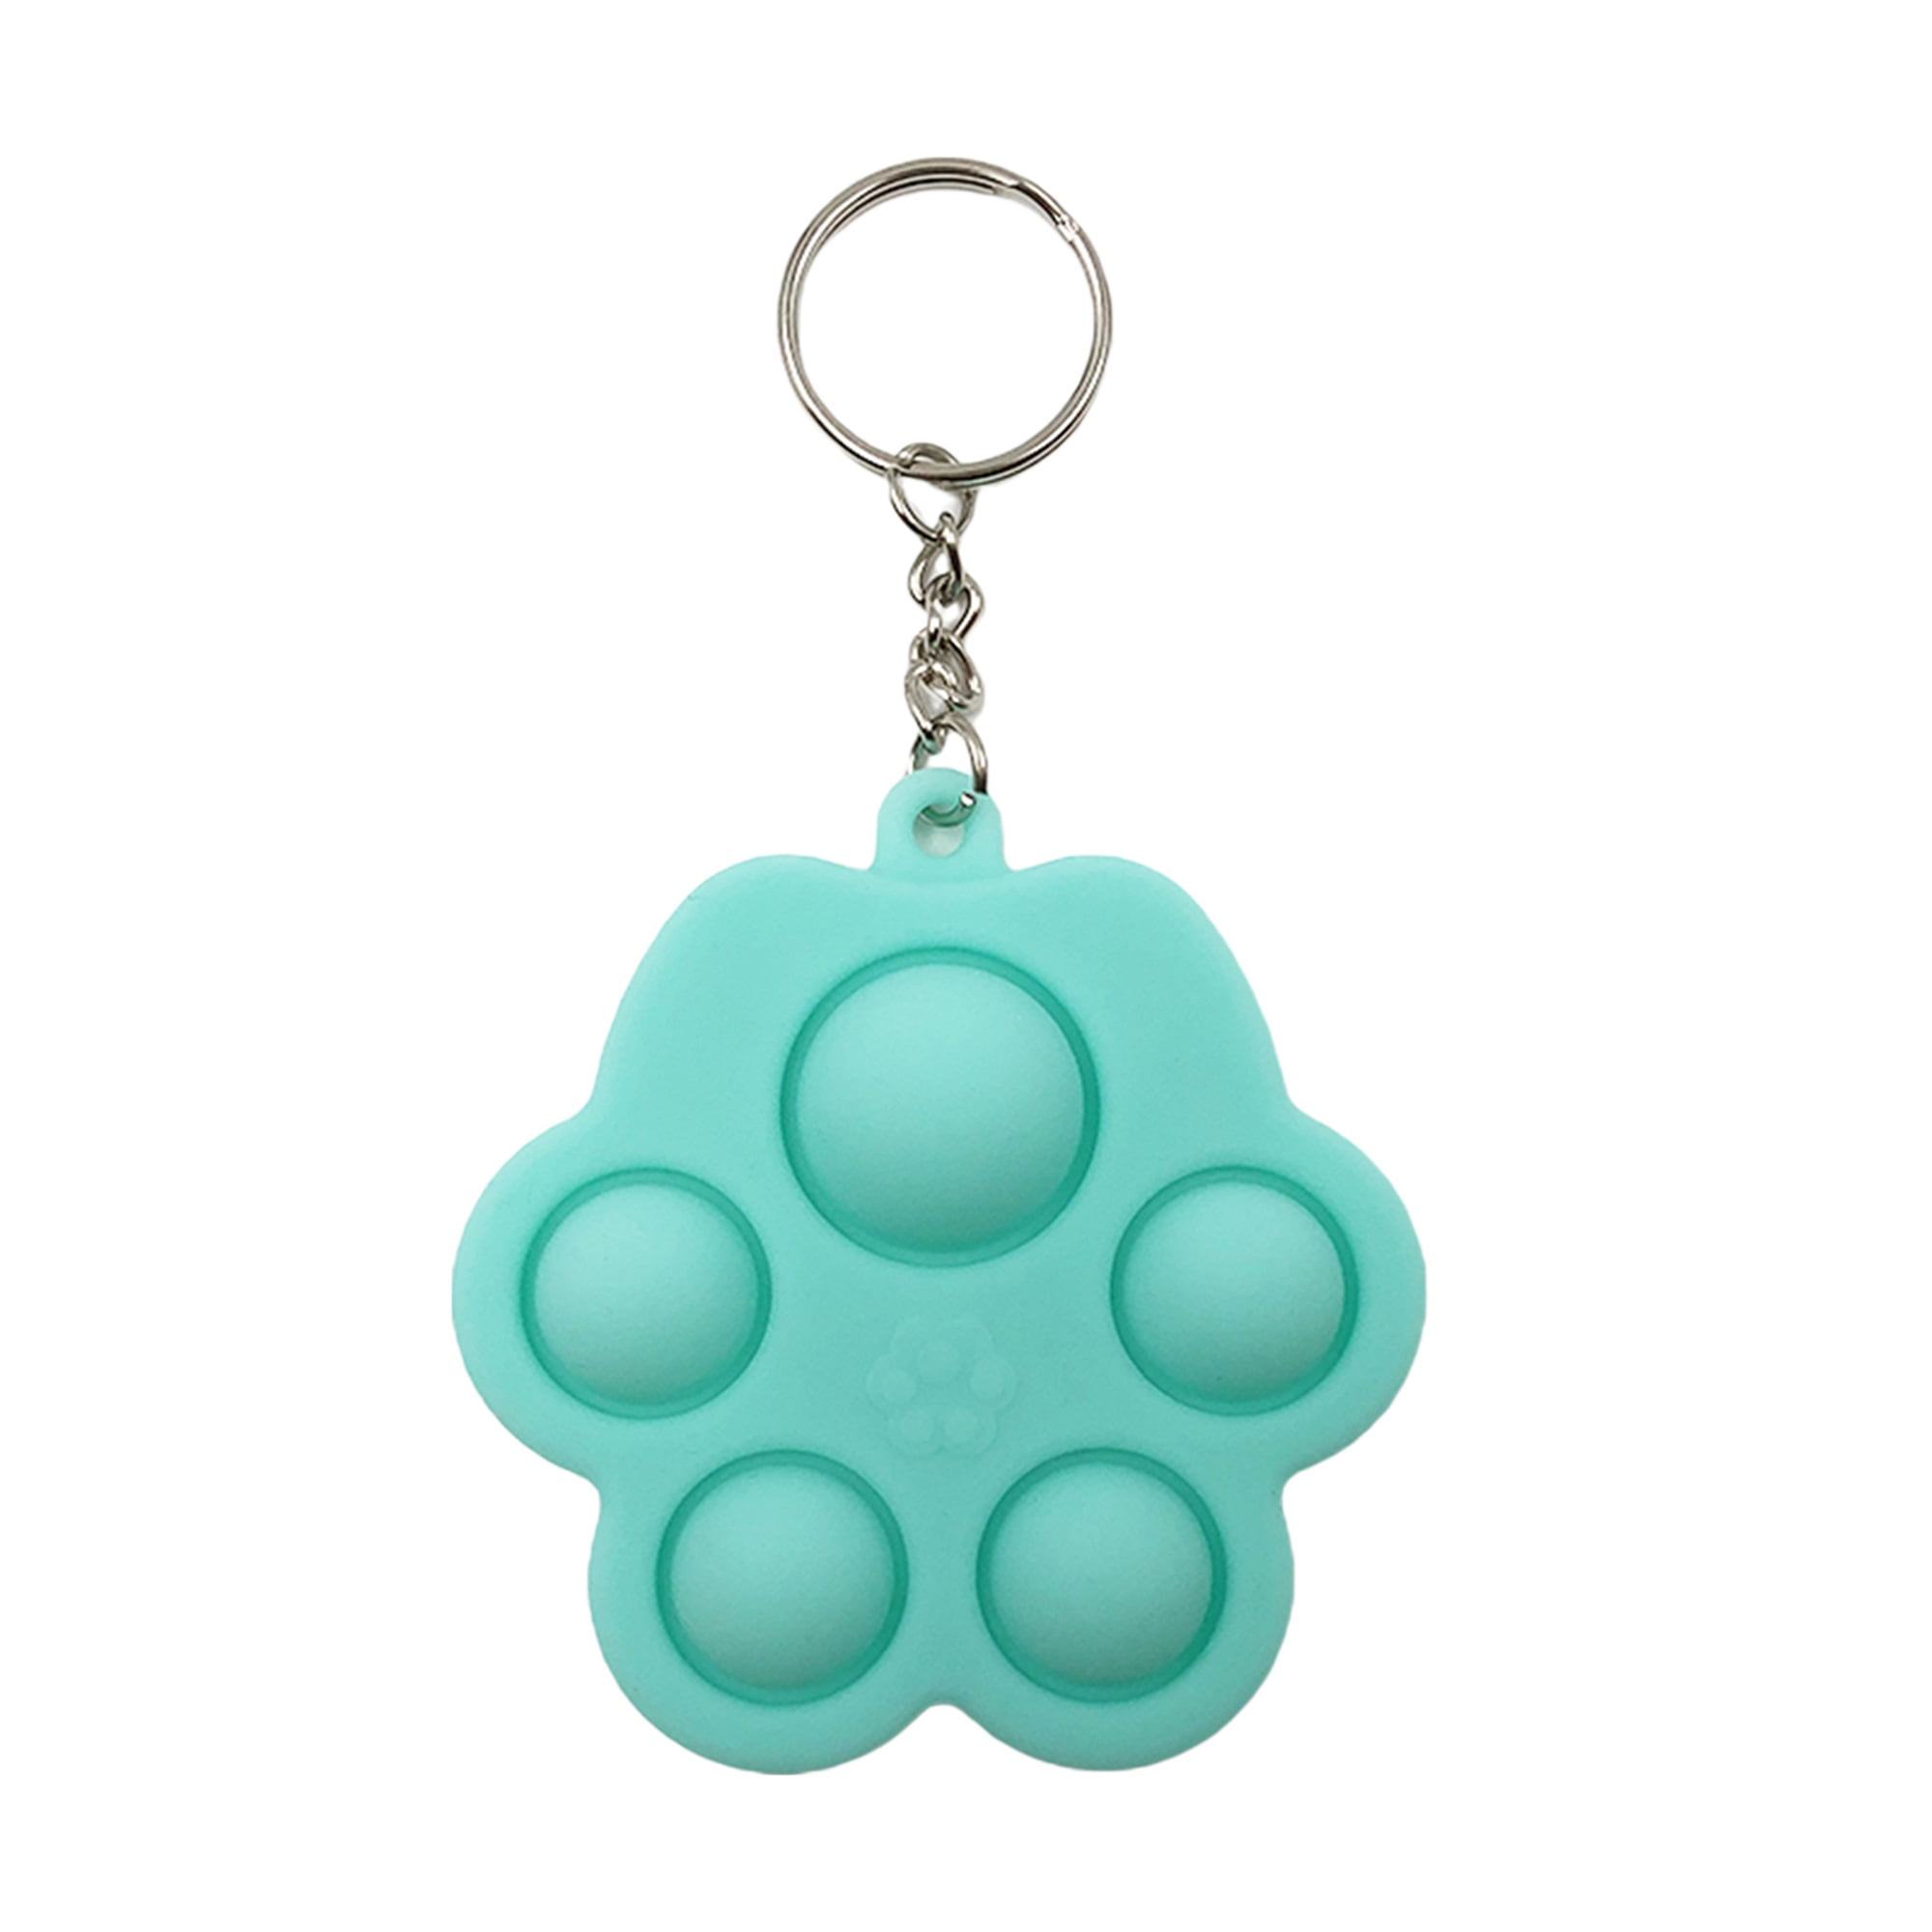 Bubble Pop Fun Mini Stress Relief Fingertip Silicone Practice Anxiety Keyring